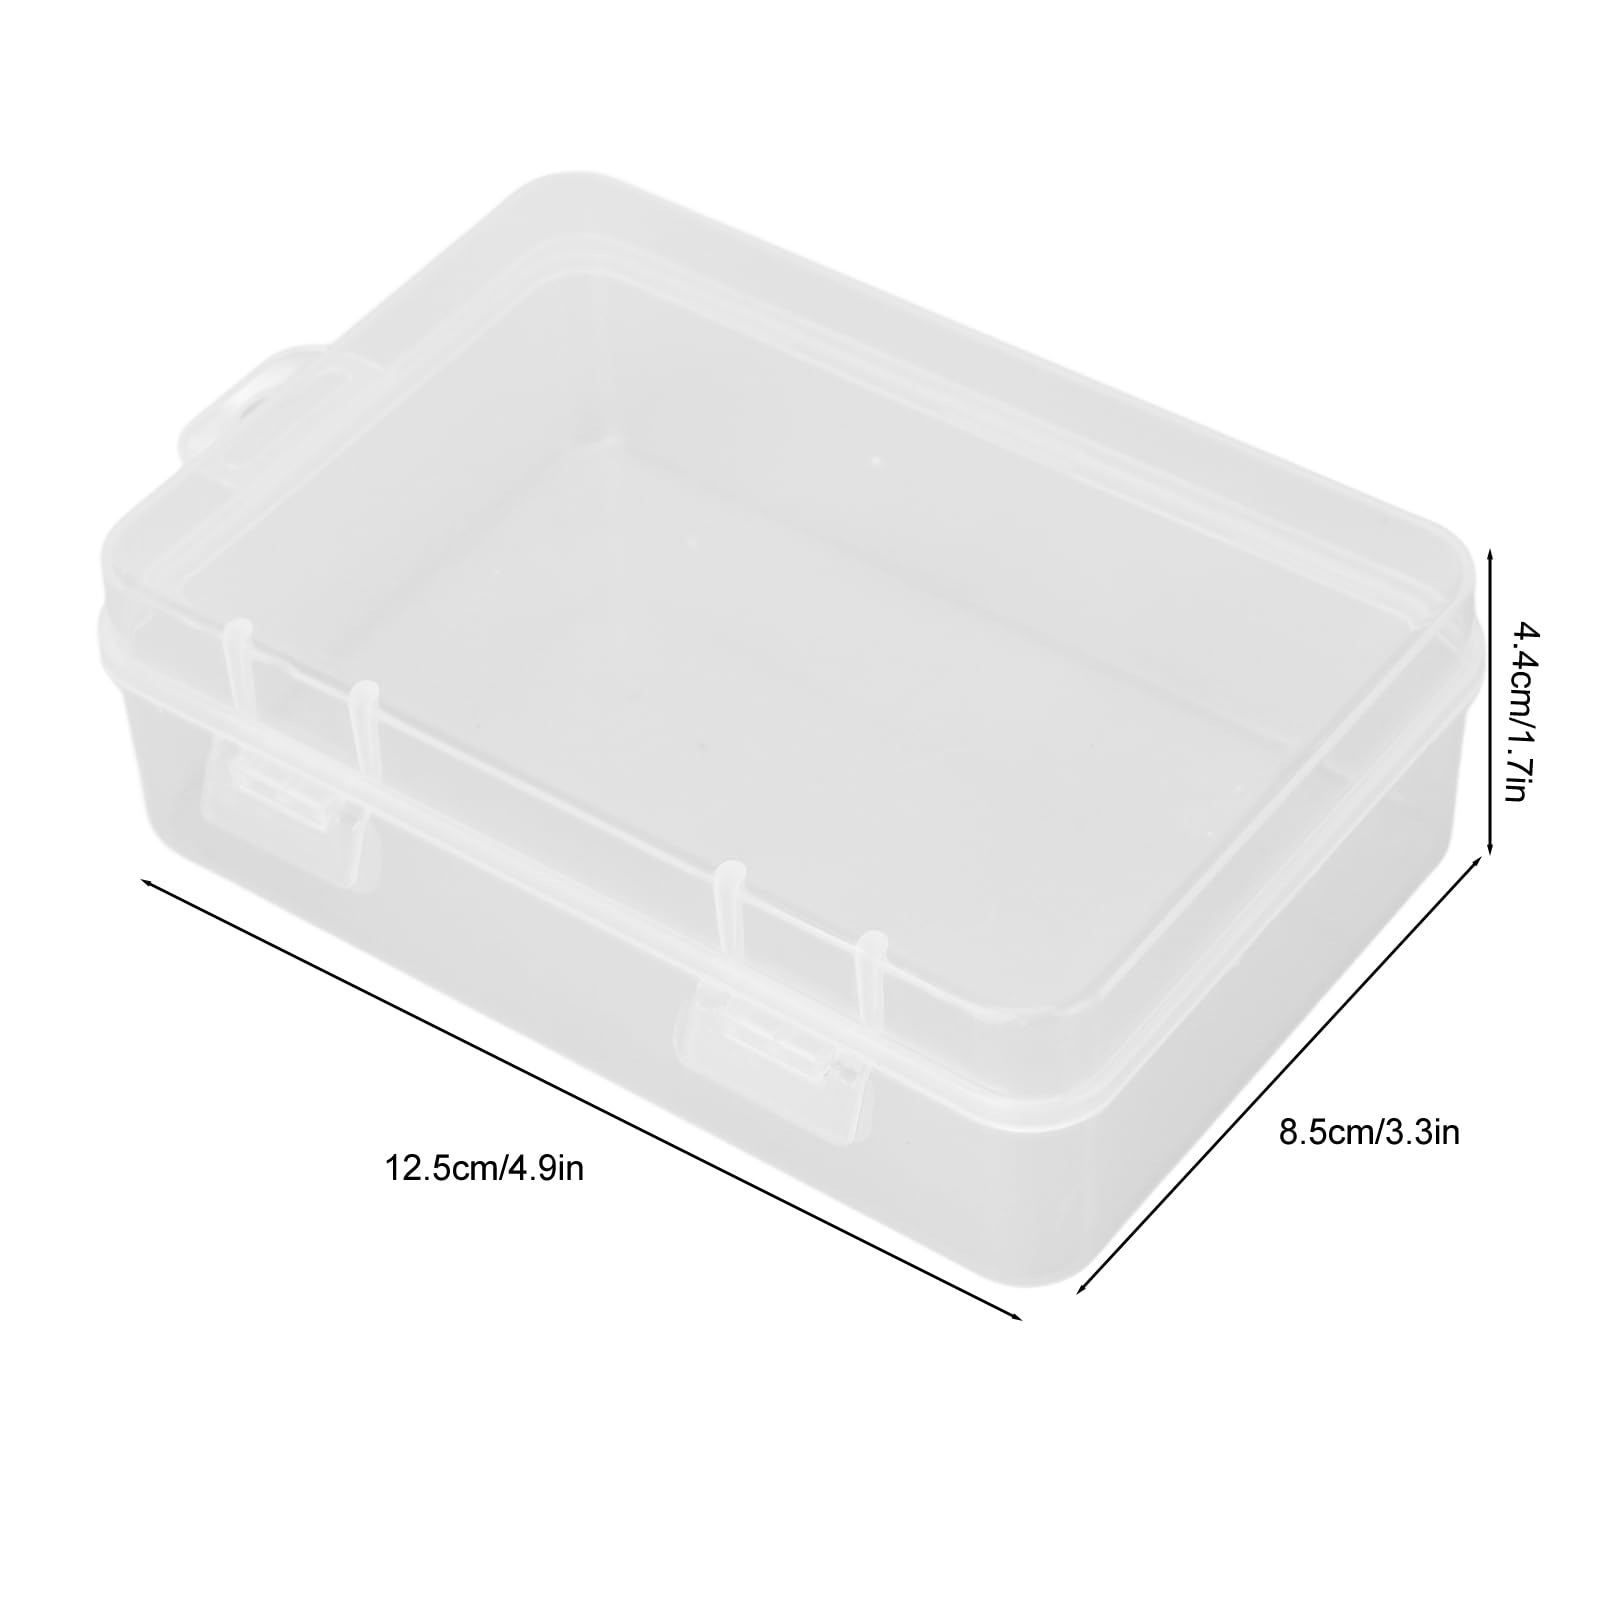 Mini Transparent Container Box Small Clear Dustproof PP Safe Multifunctional Rectangular Jewelry Storage Box Makeup Products